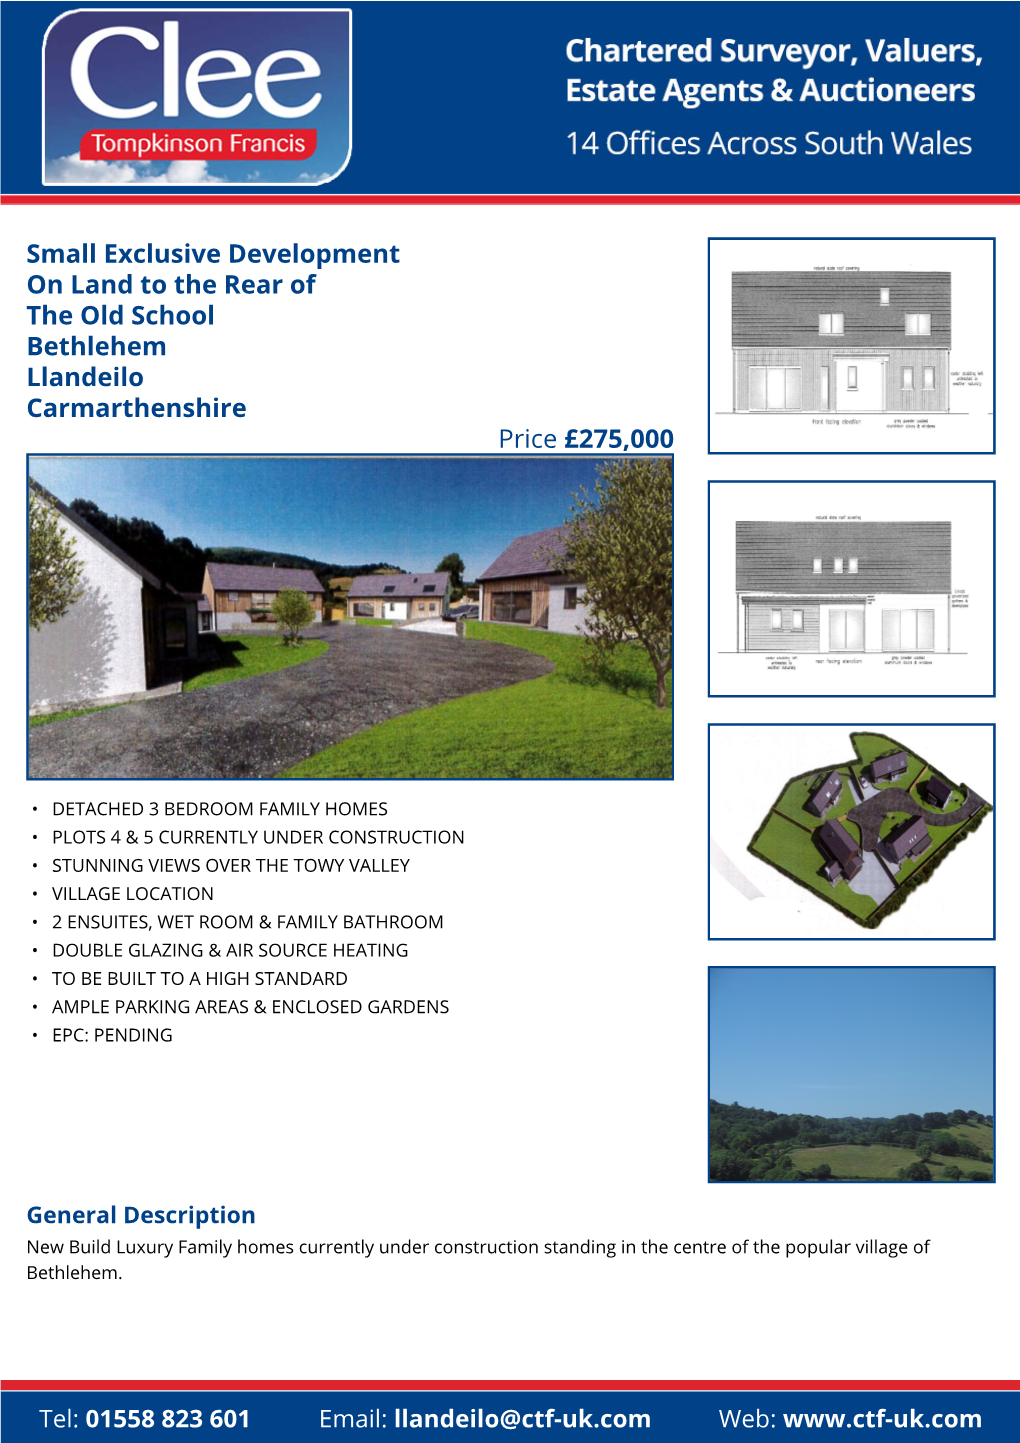 Small Exclusive Development on Land to the Rear of the Old School Bethlehem Llandeilo Carmarthenshire Price £275,000